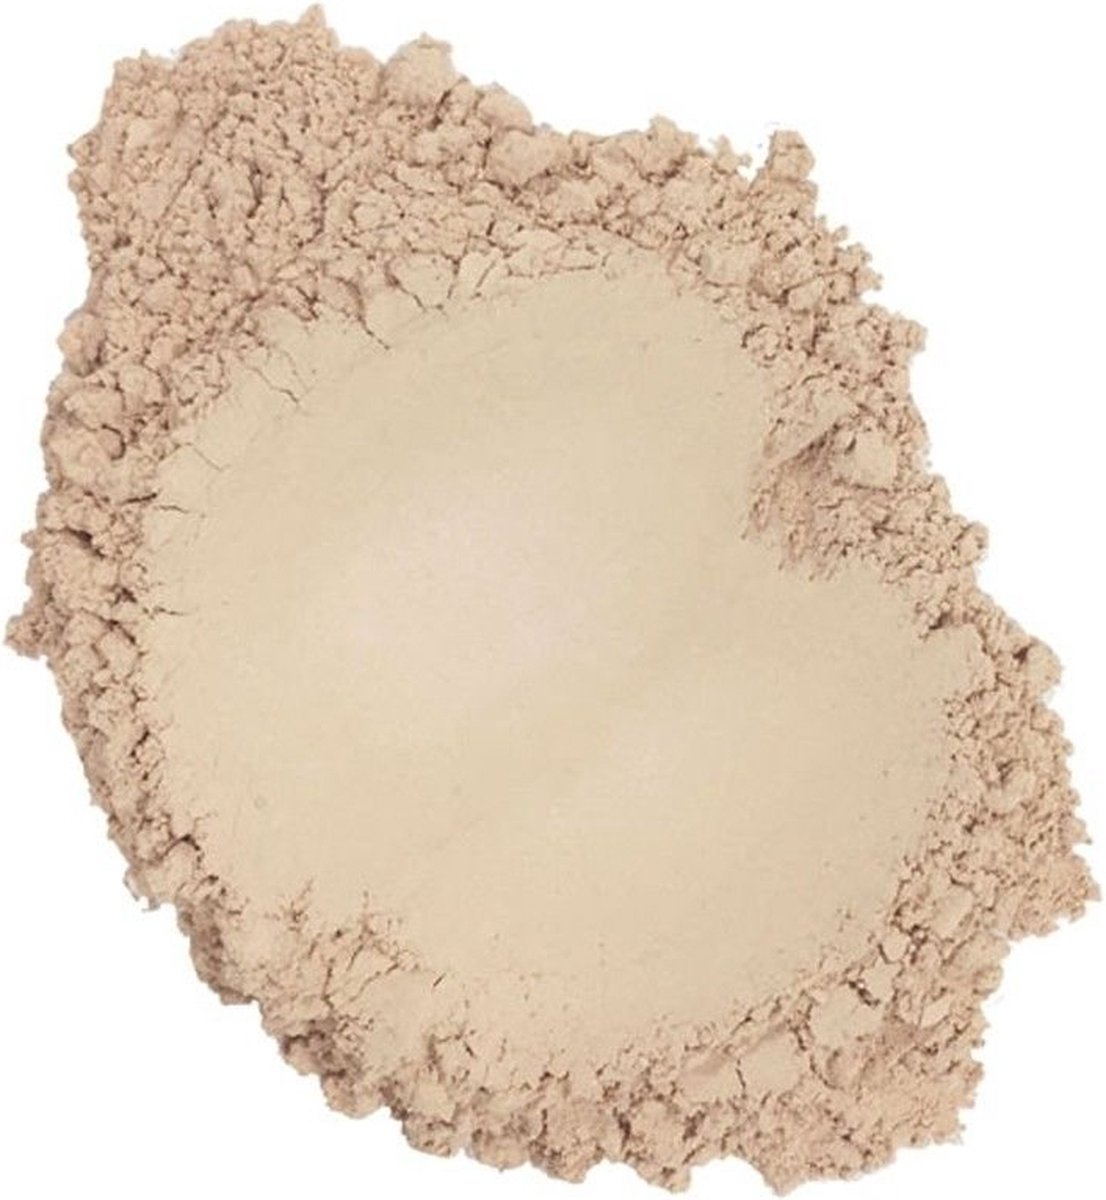 Lily Lolo Mineral Foundation SPF 15 Blondie